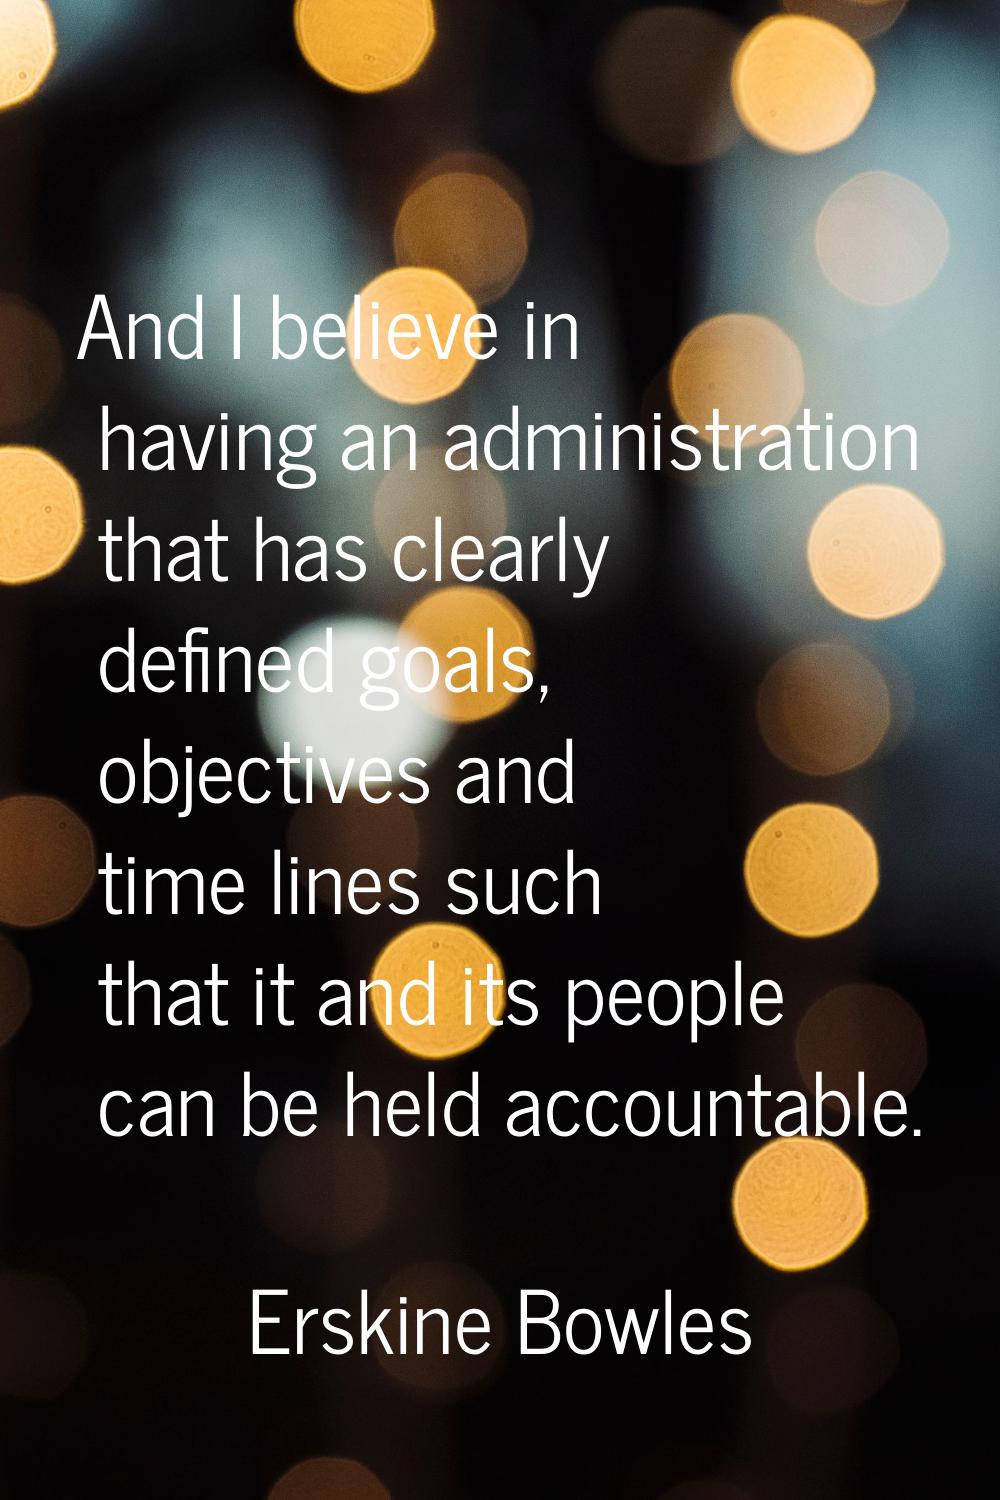 And I believe in having an administration that has clearly defined goals, objectives and time lines